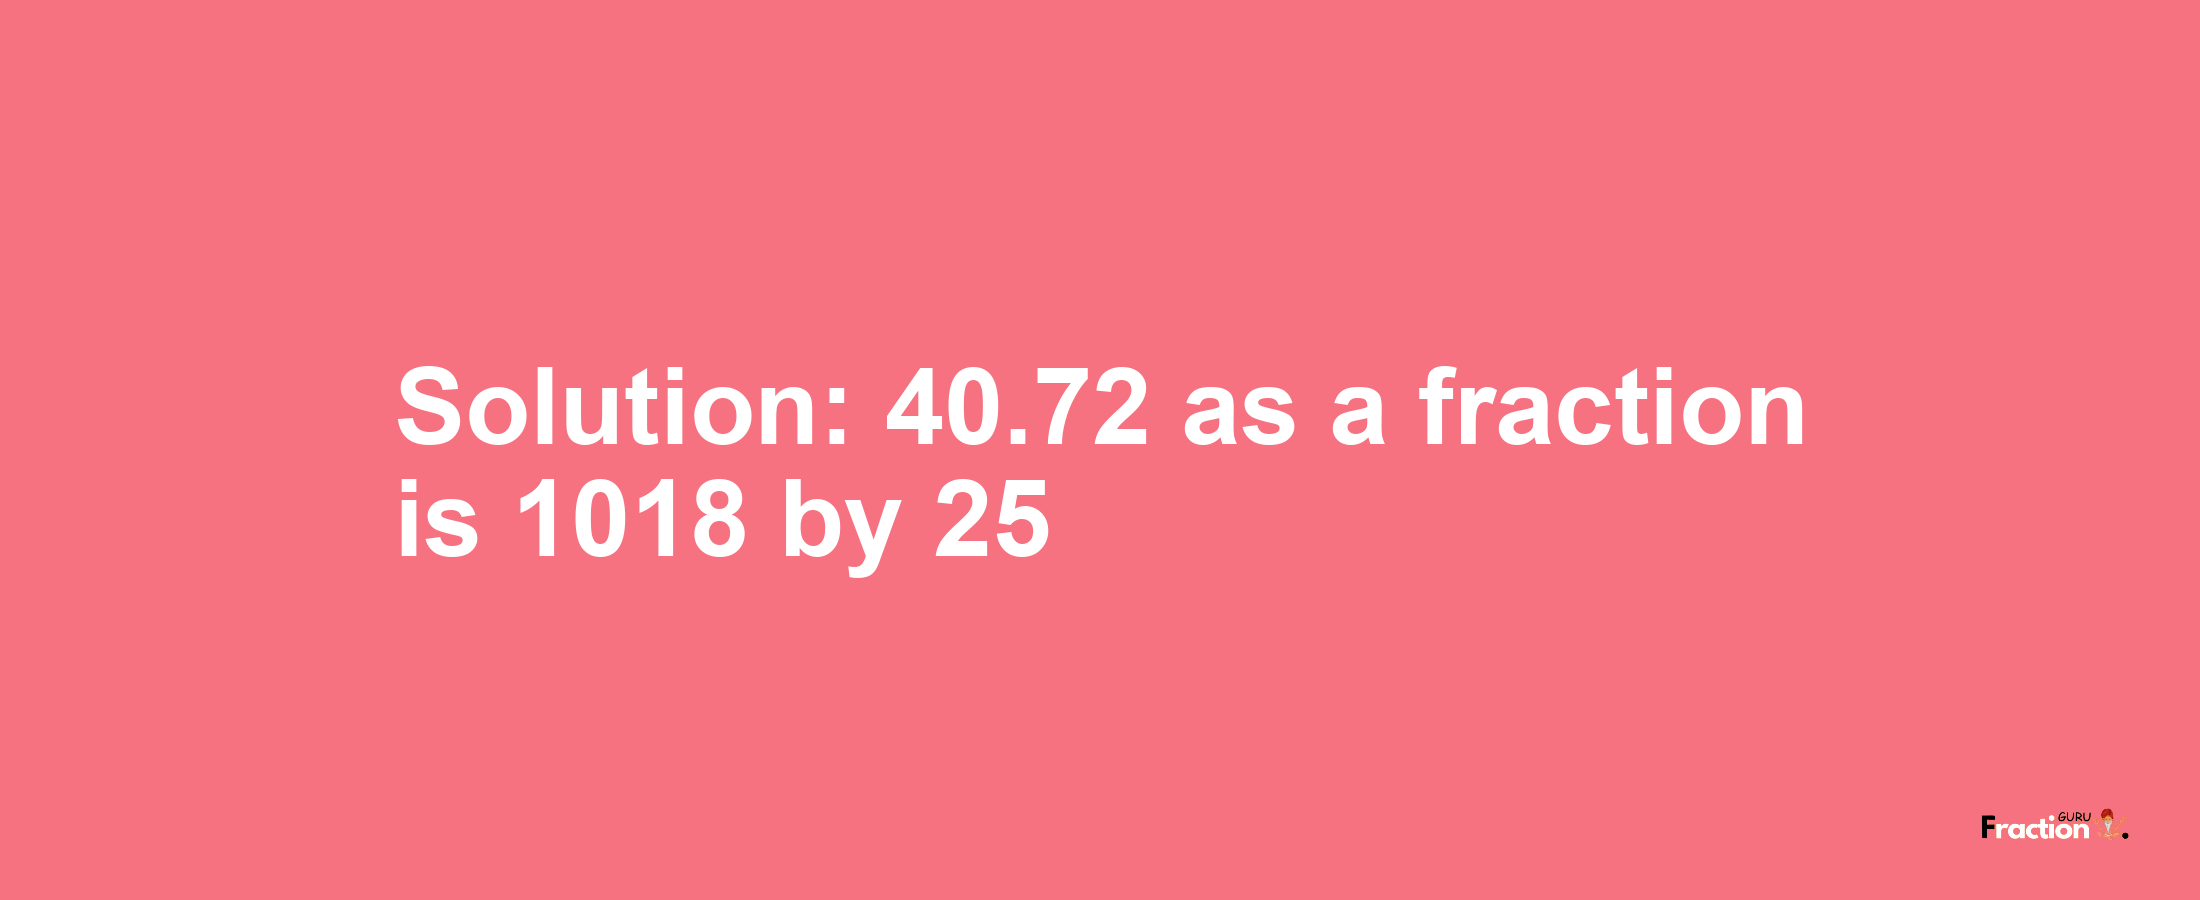 Solution:40.72 as a fraction is 1018/25